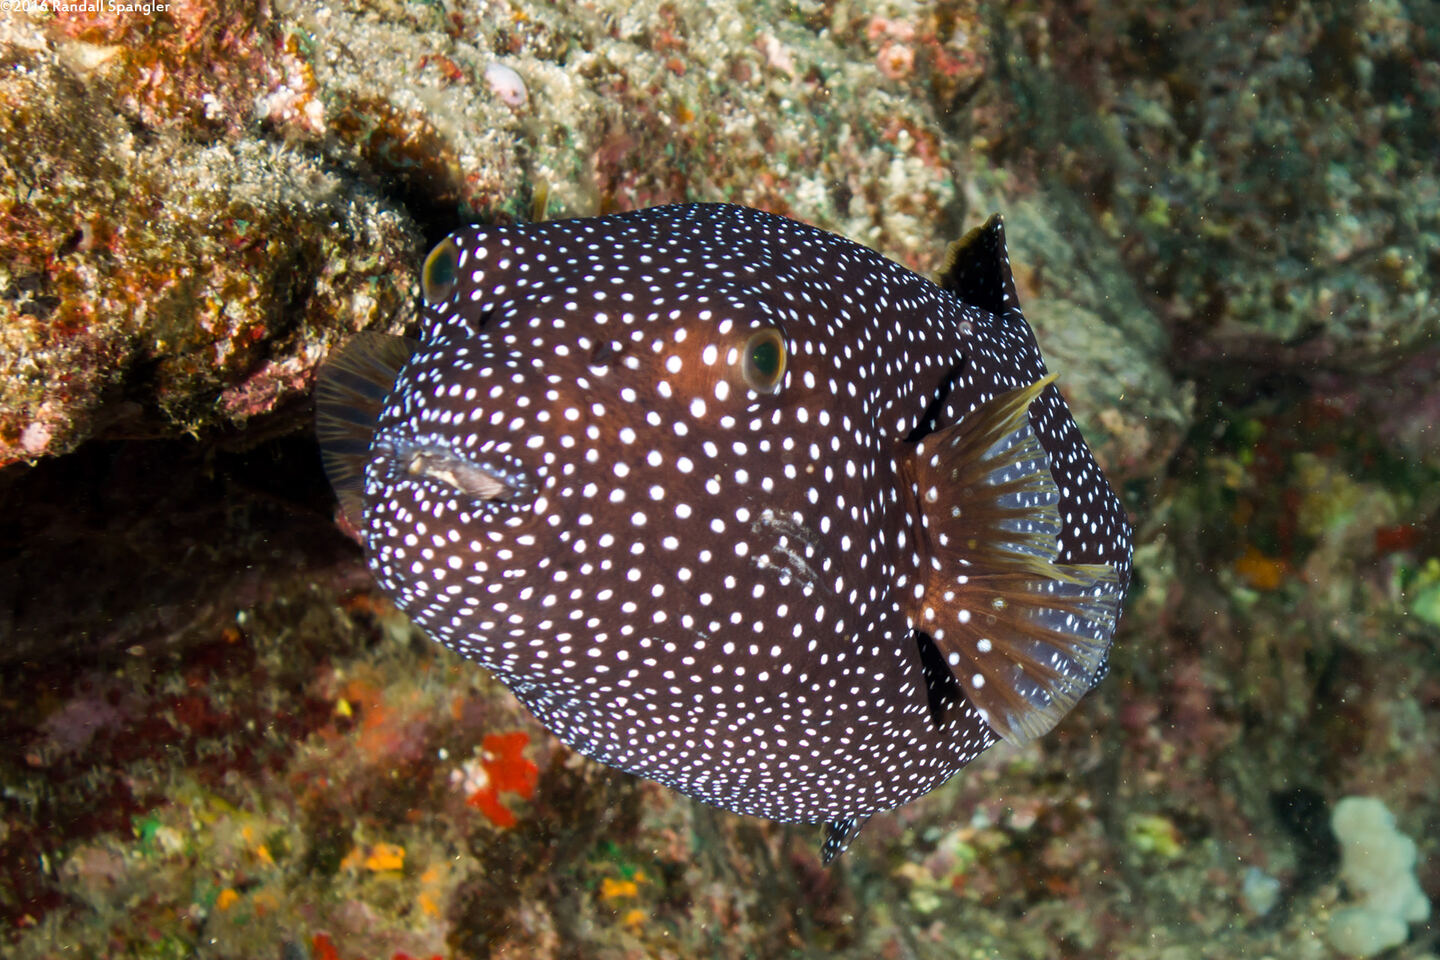 Arothron meleagris (Spotted Puffer); All puffed up